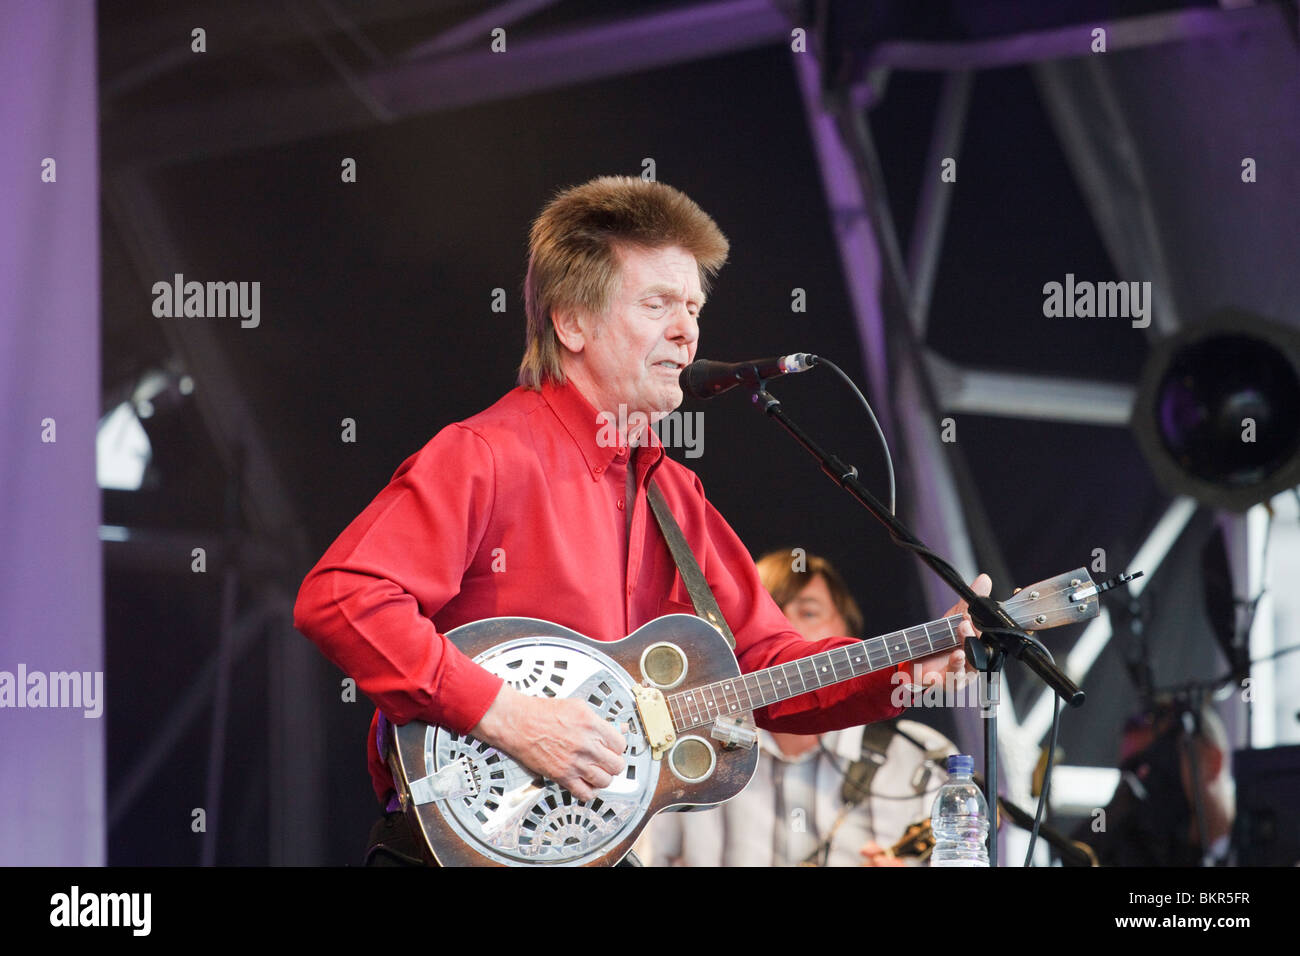 Rock n roll singer and musician Joe Brown on stage, London, UK Stock Photo